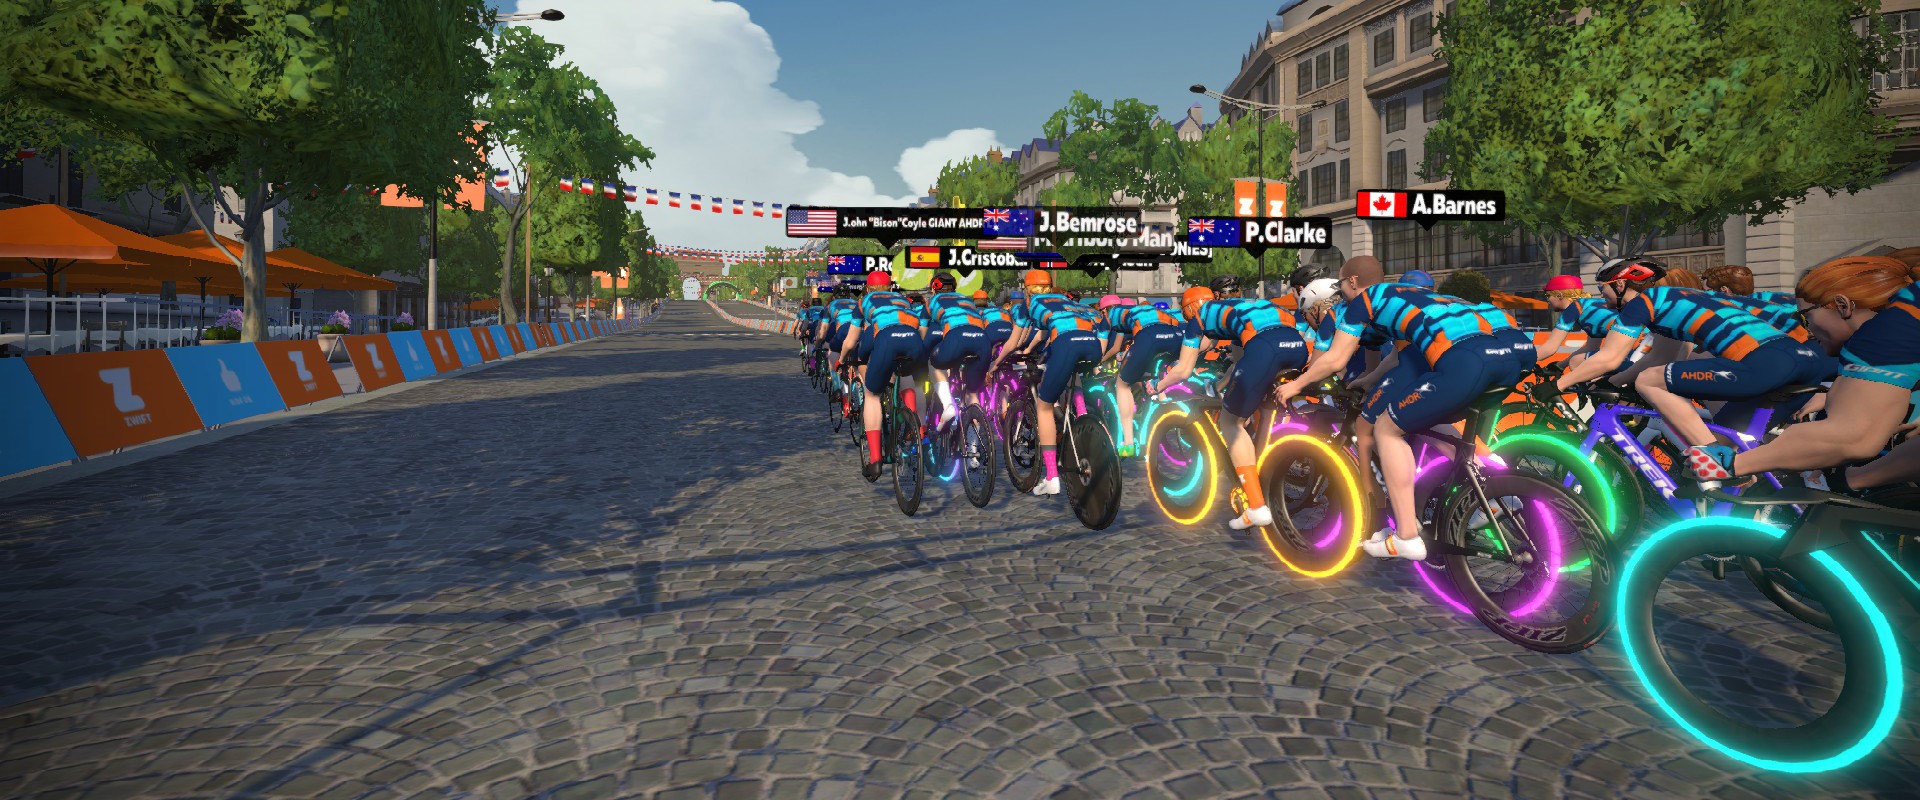 Tim Searle Ahdr Partnership Zwift Jetblack Cyling